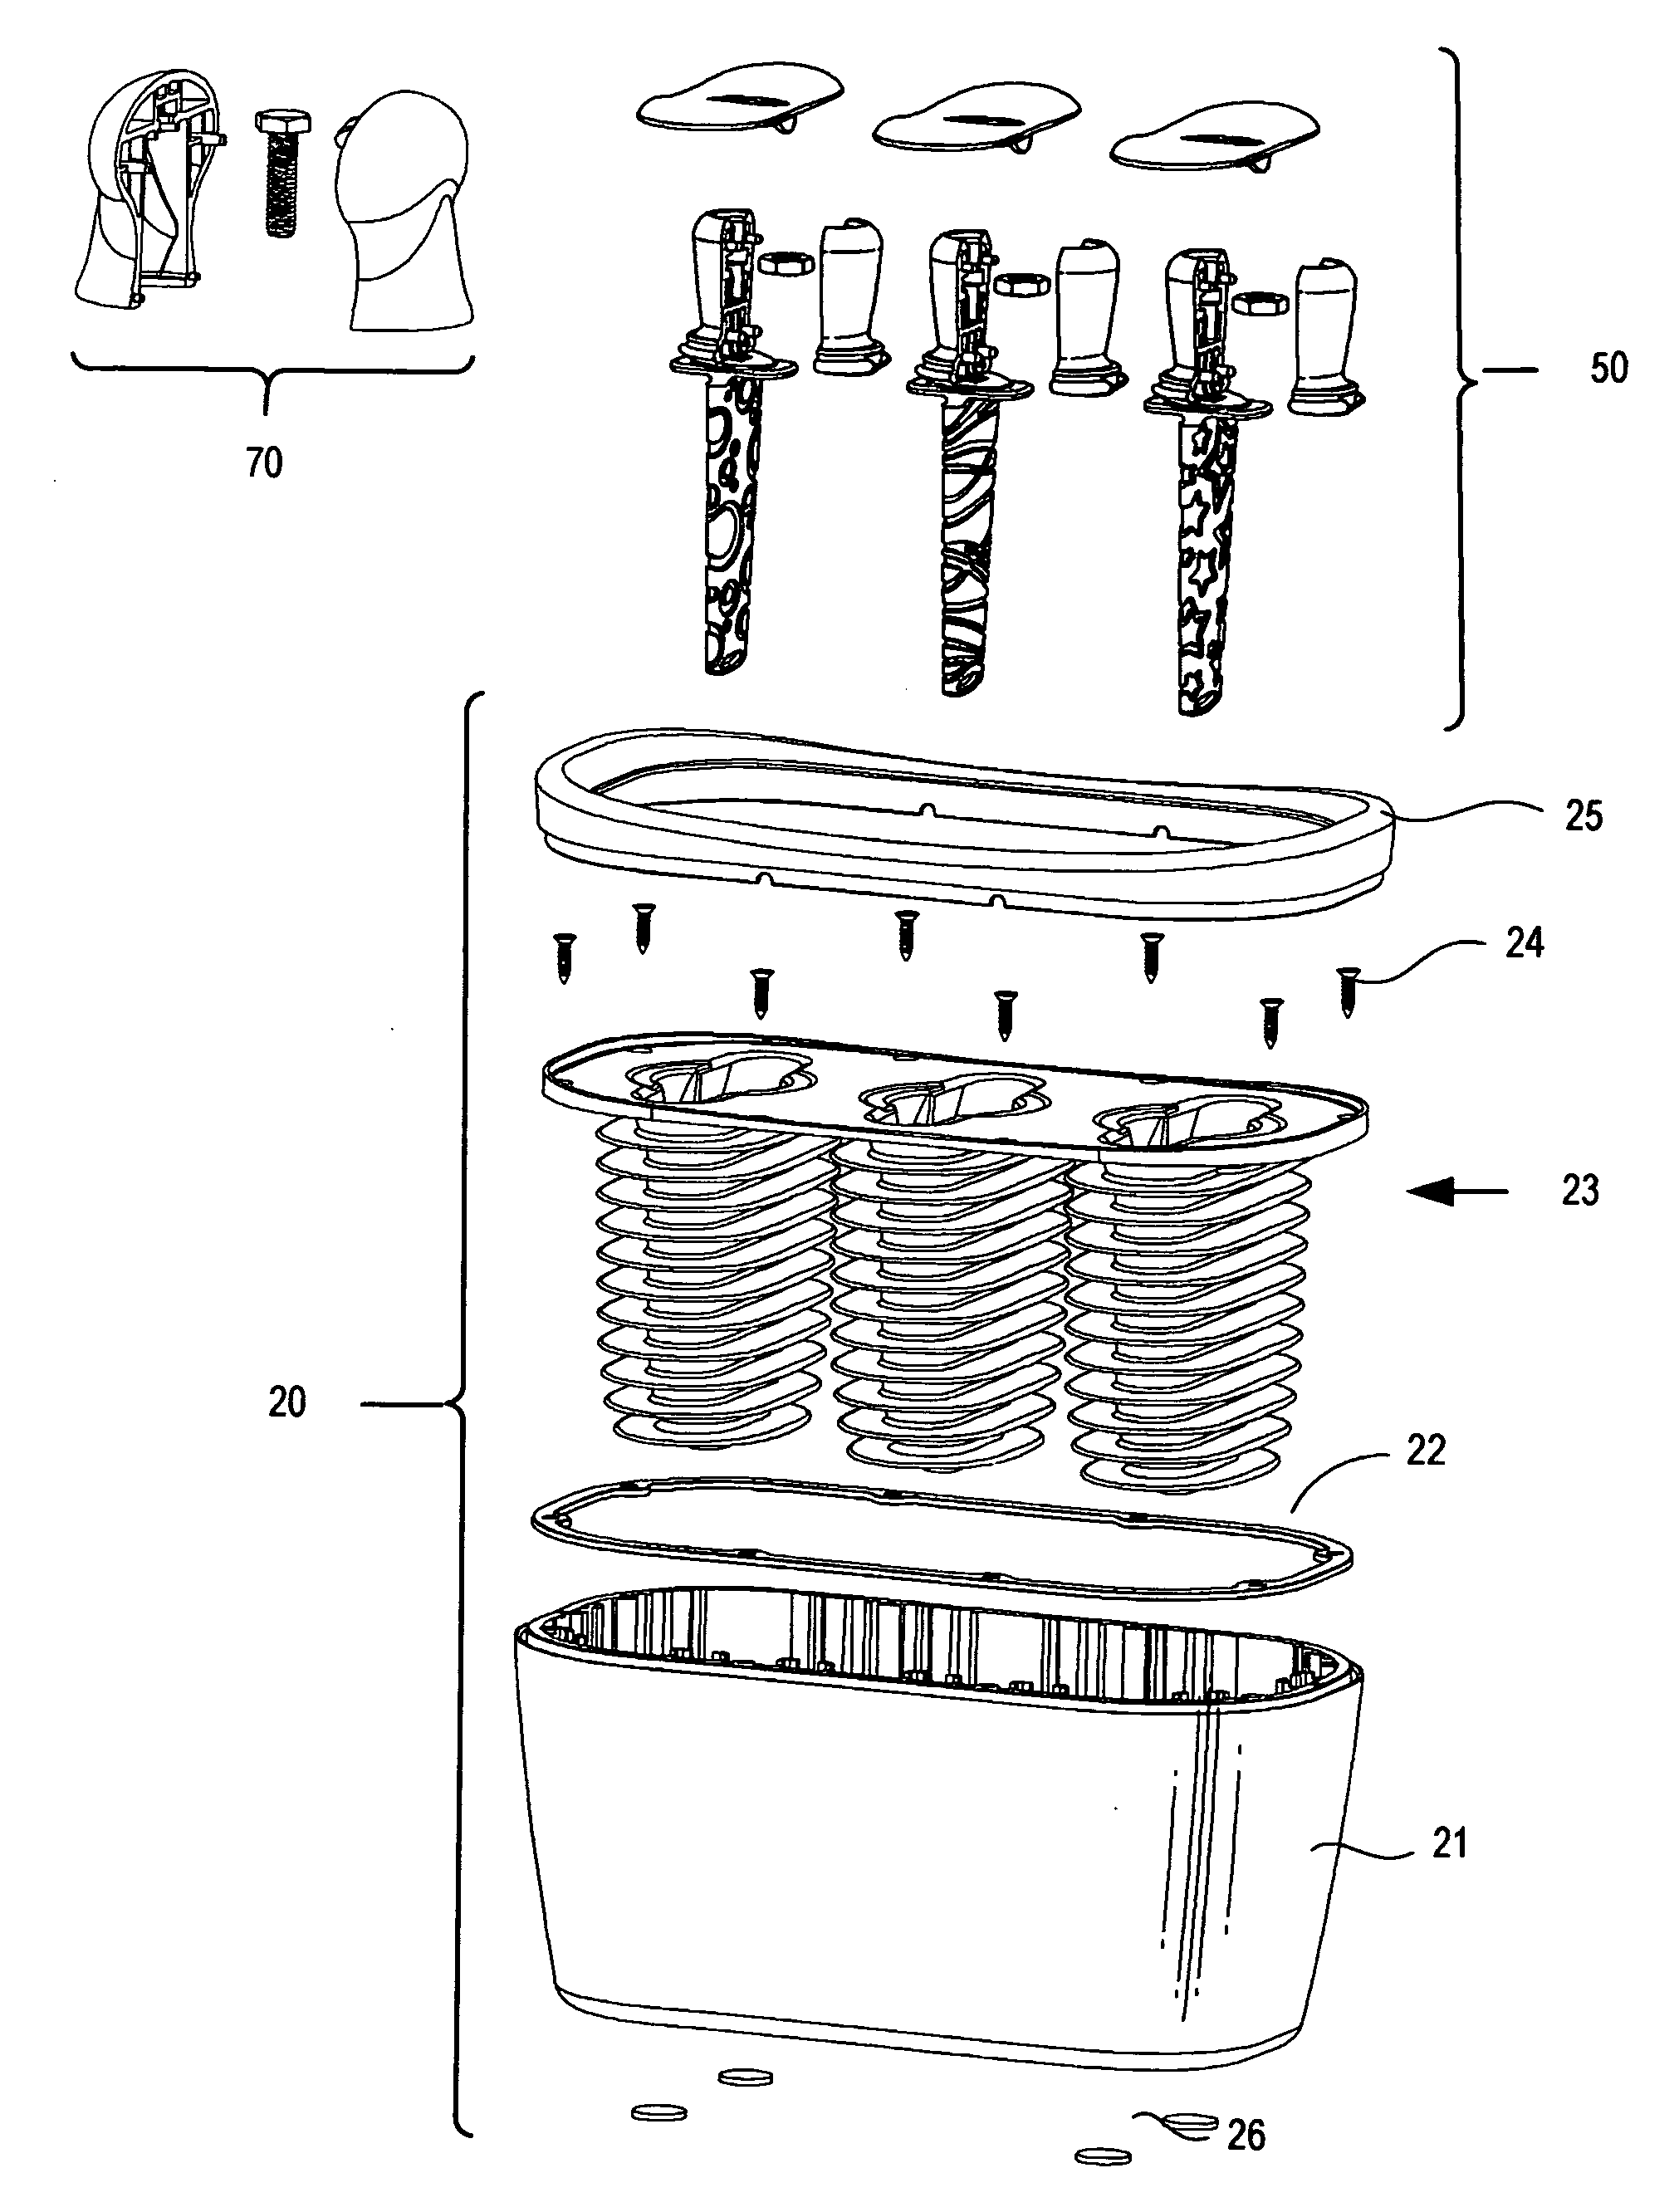 Method and apparatus for making frozen comestibles